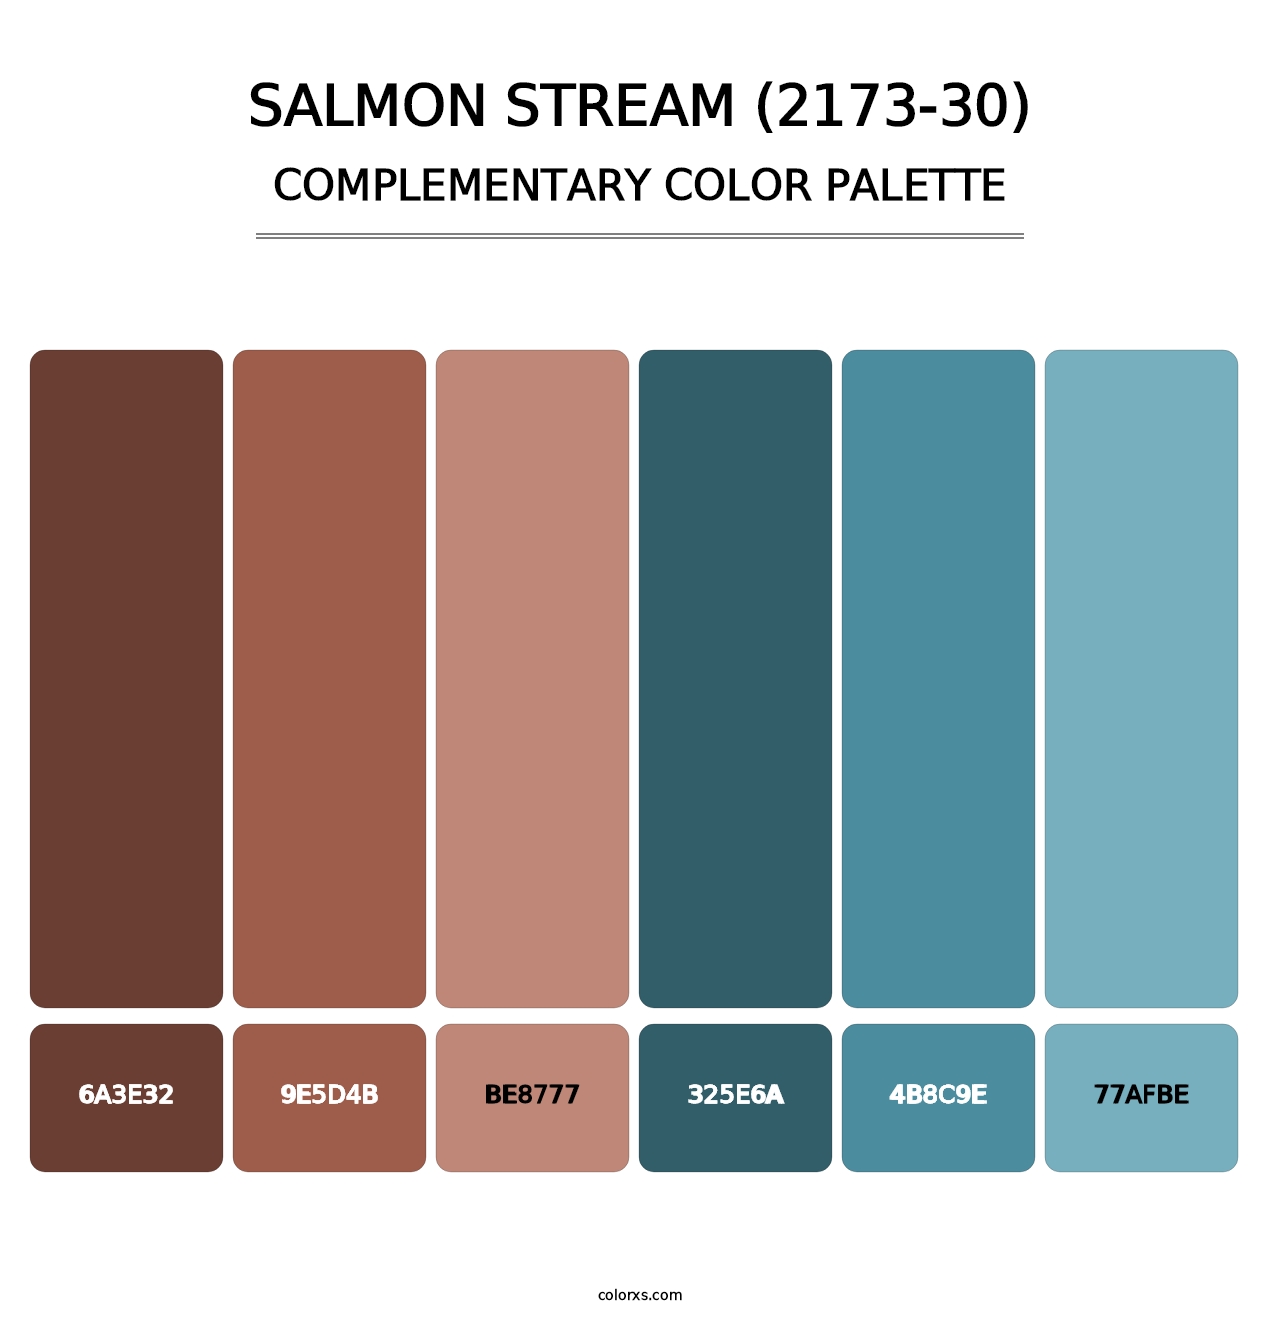 Salmon Stream (2173-30) - Complementary Color Palette